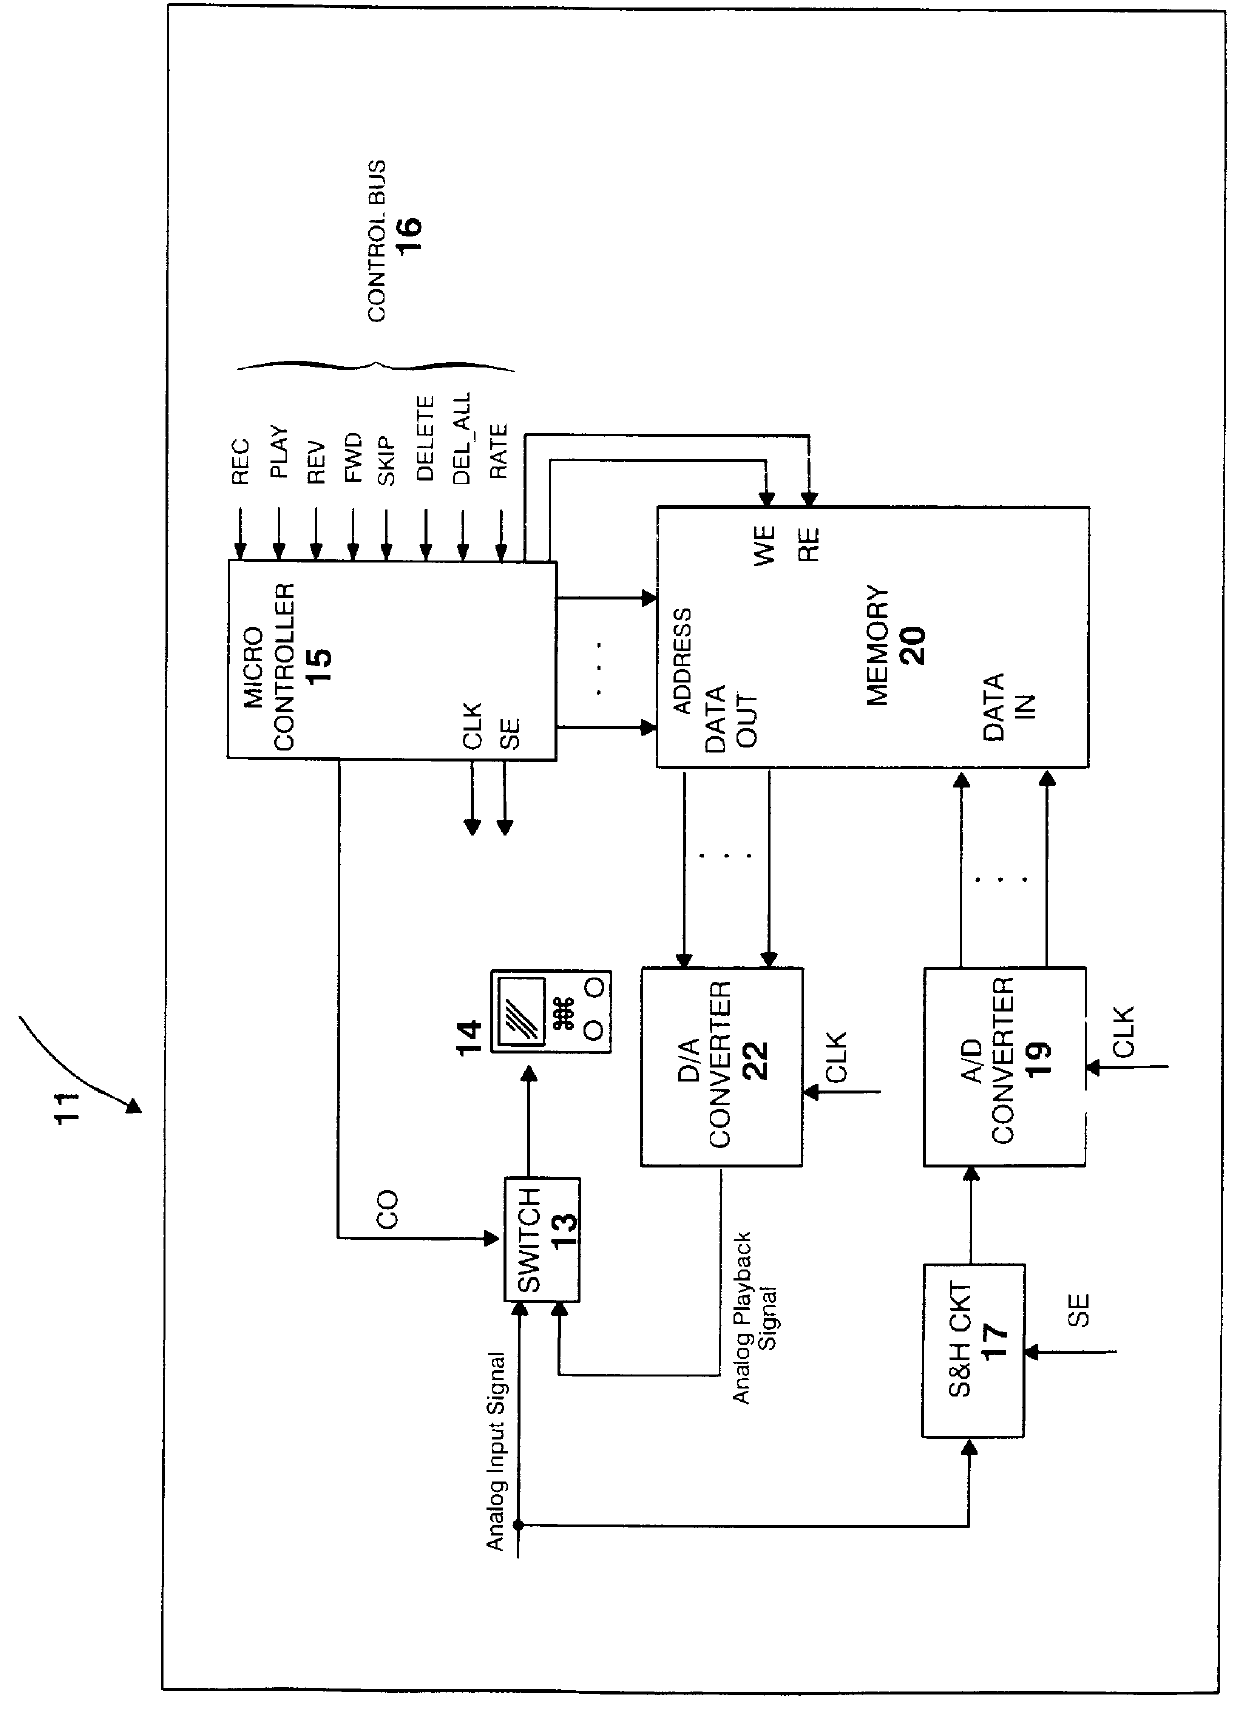 Signal recorder with deferred recording